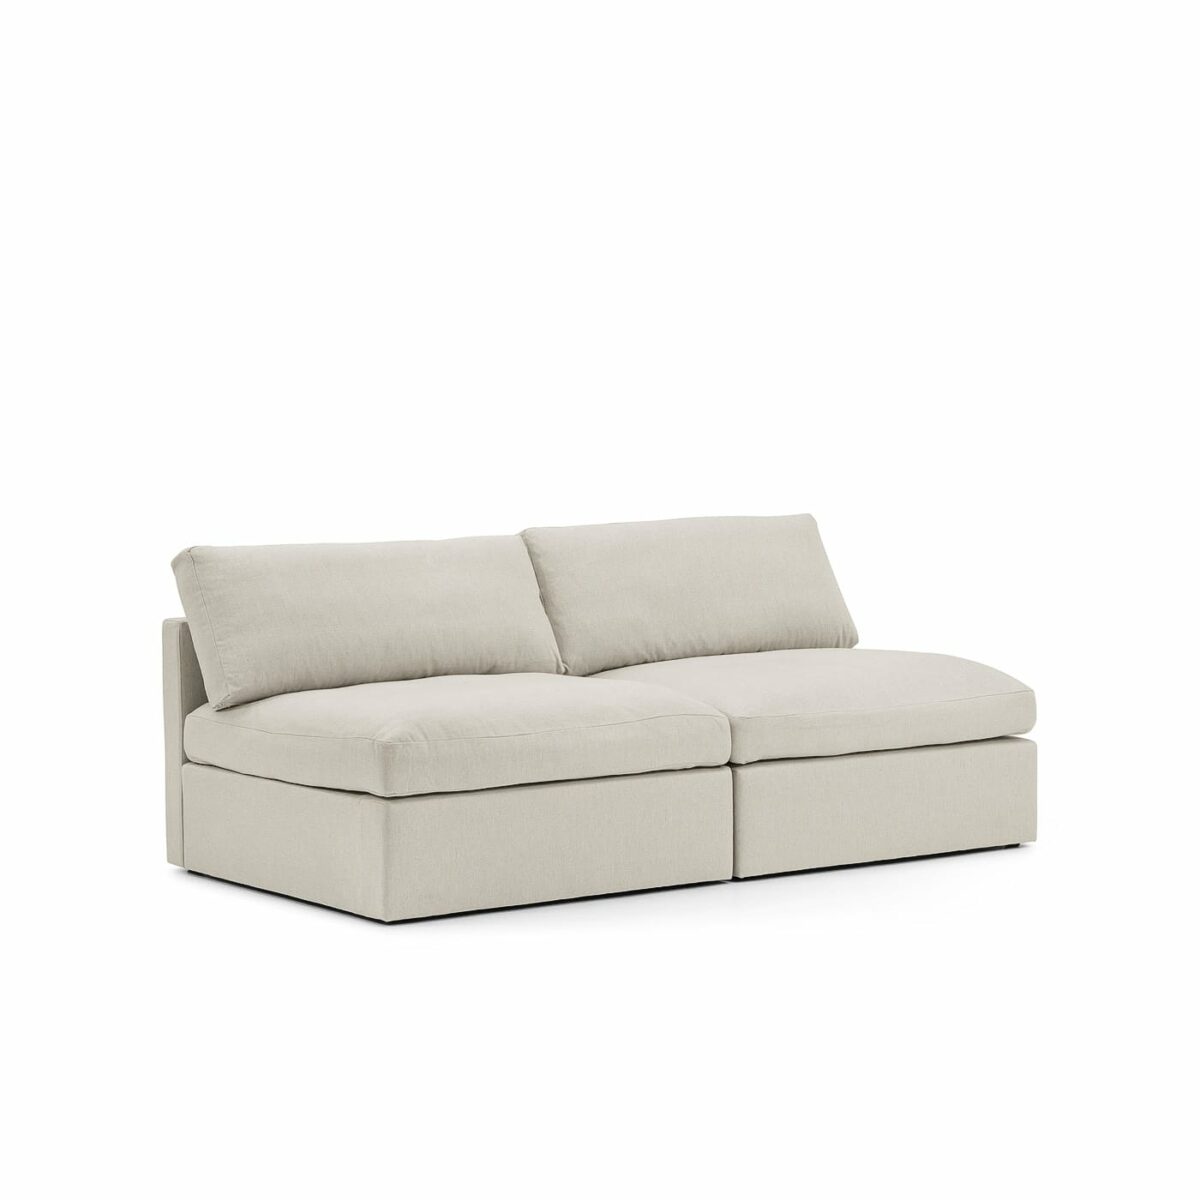 Lucie Grande 2-Seat Sofa (Without Armrests) True White